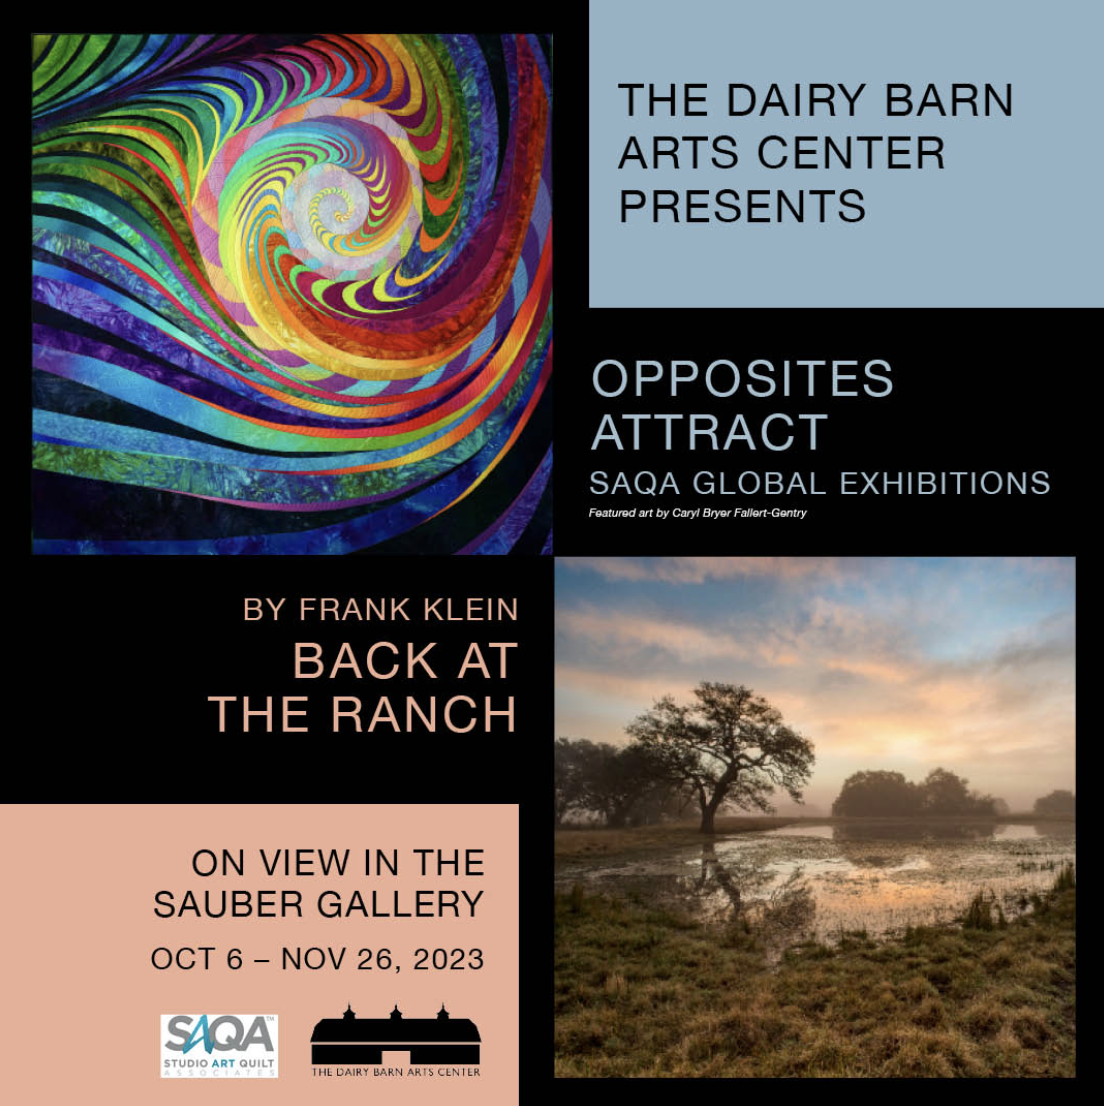 A flyer for an exhibition at the Dairy Barn Arts Center entitled Opposites Attract